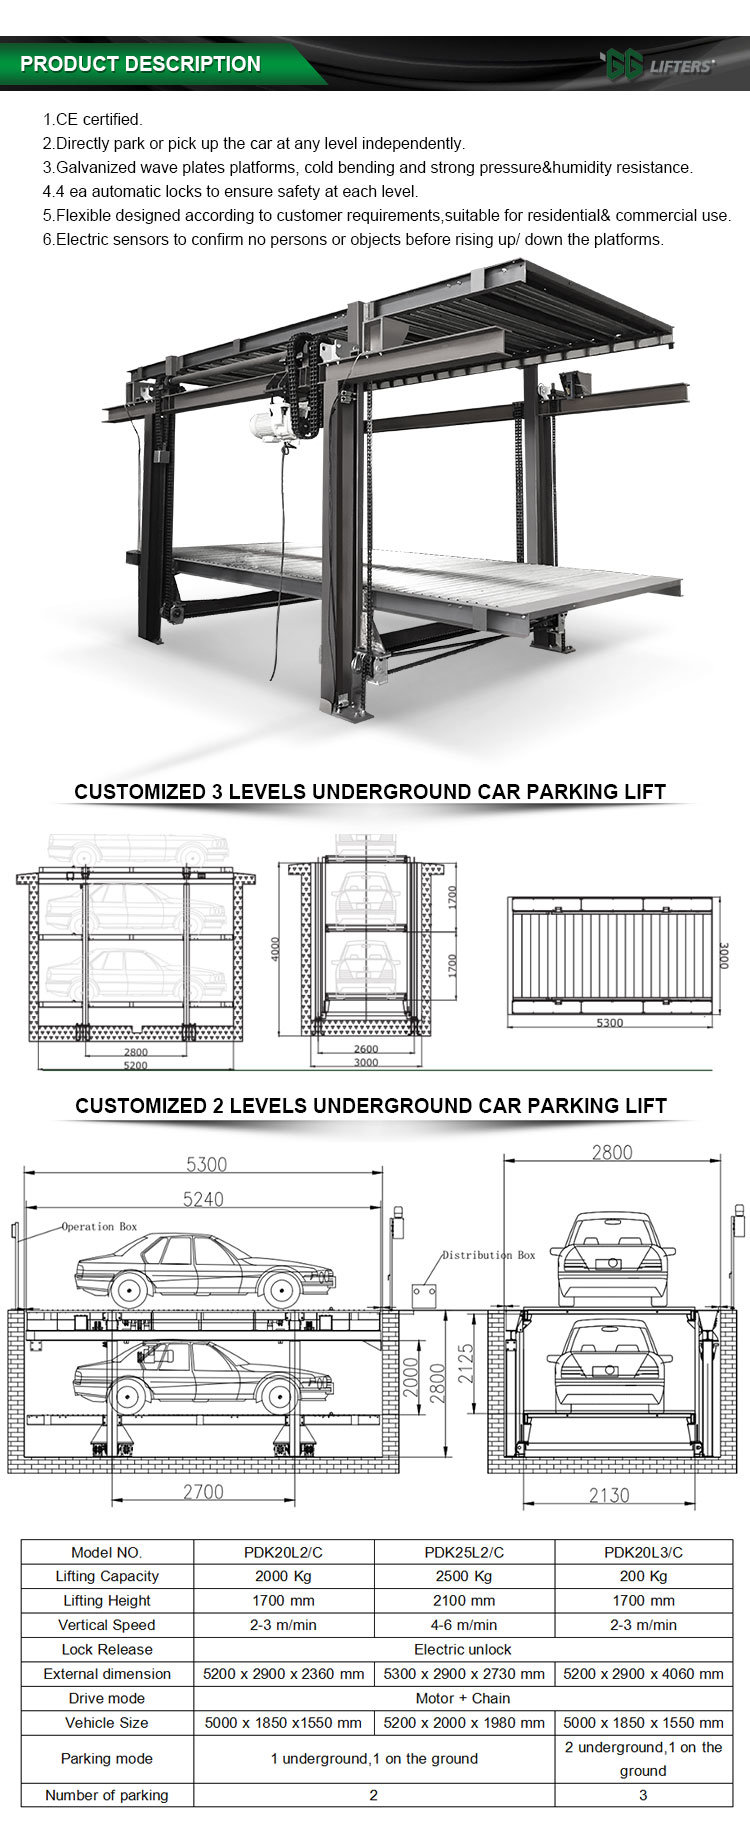 GG Lifters Parking Stacker Underground Type Steel Structure Mechanical Car Parking Lift for Home Parking